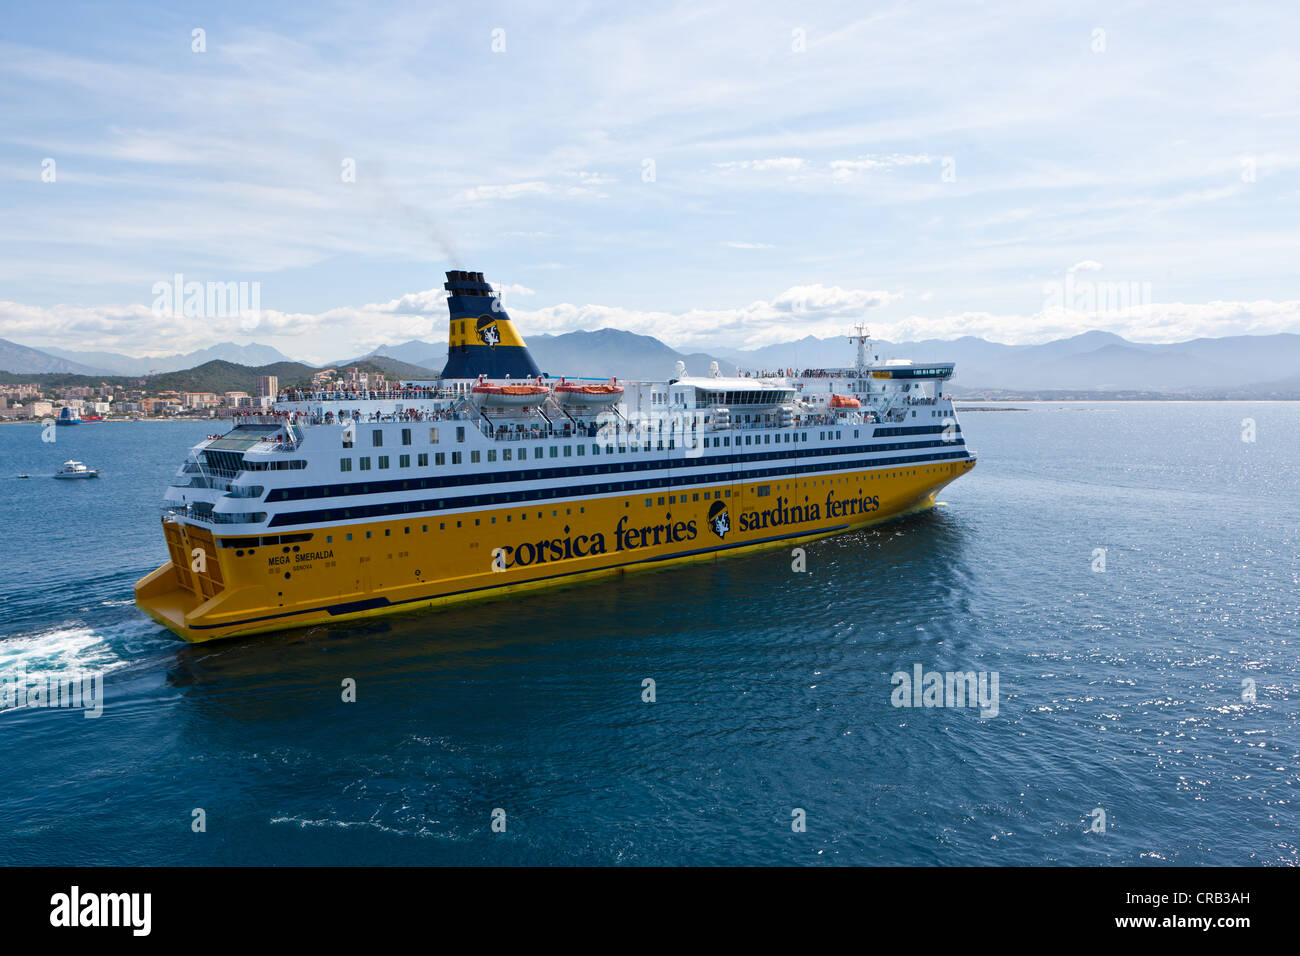 A ferry of Corsica Ferries leaving the port of Ajaccio, Corsica, France, Europe Stock Photo